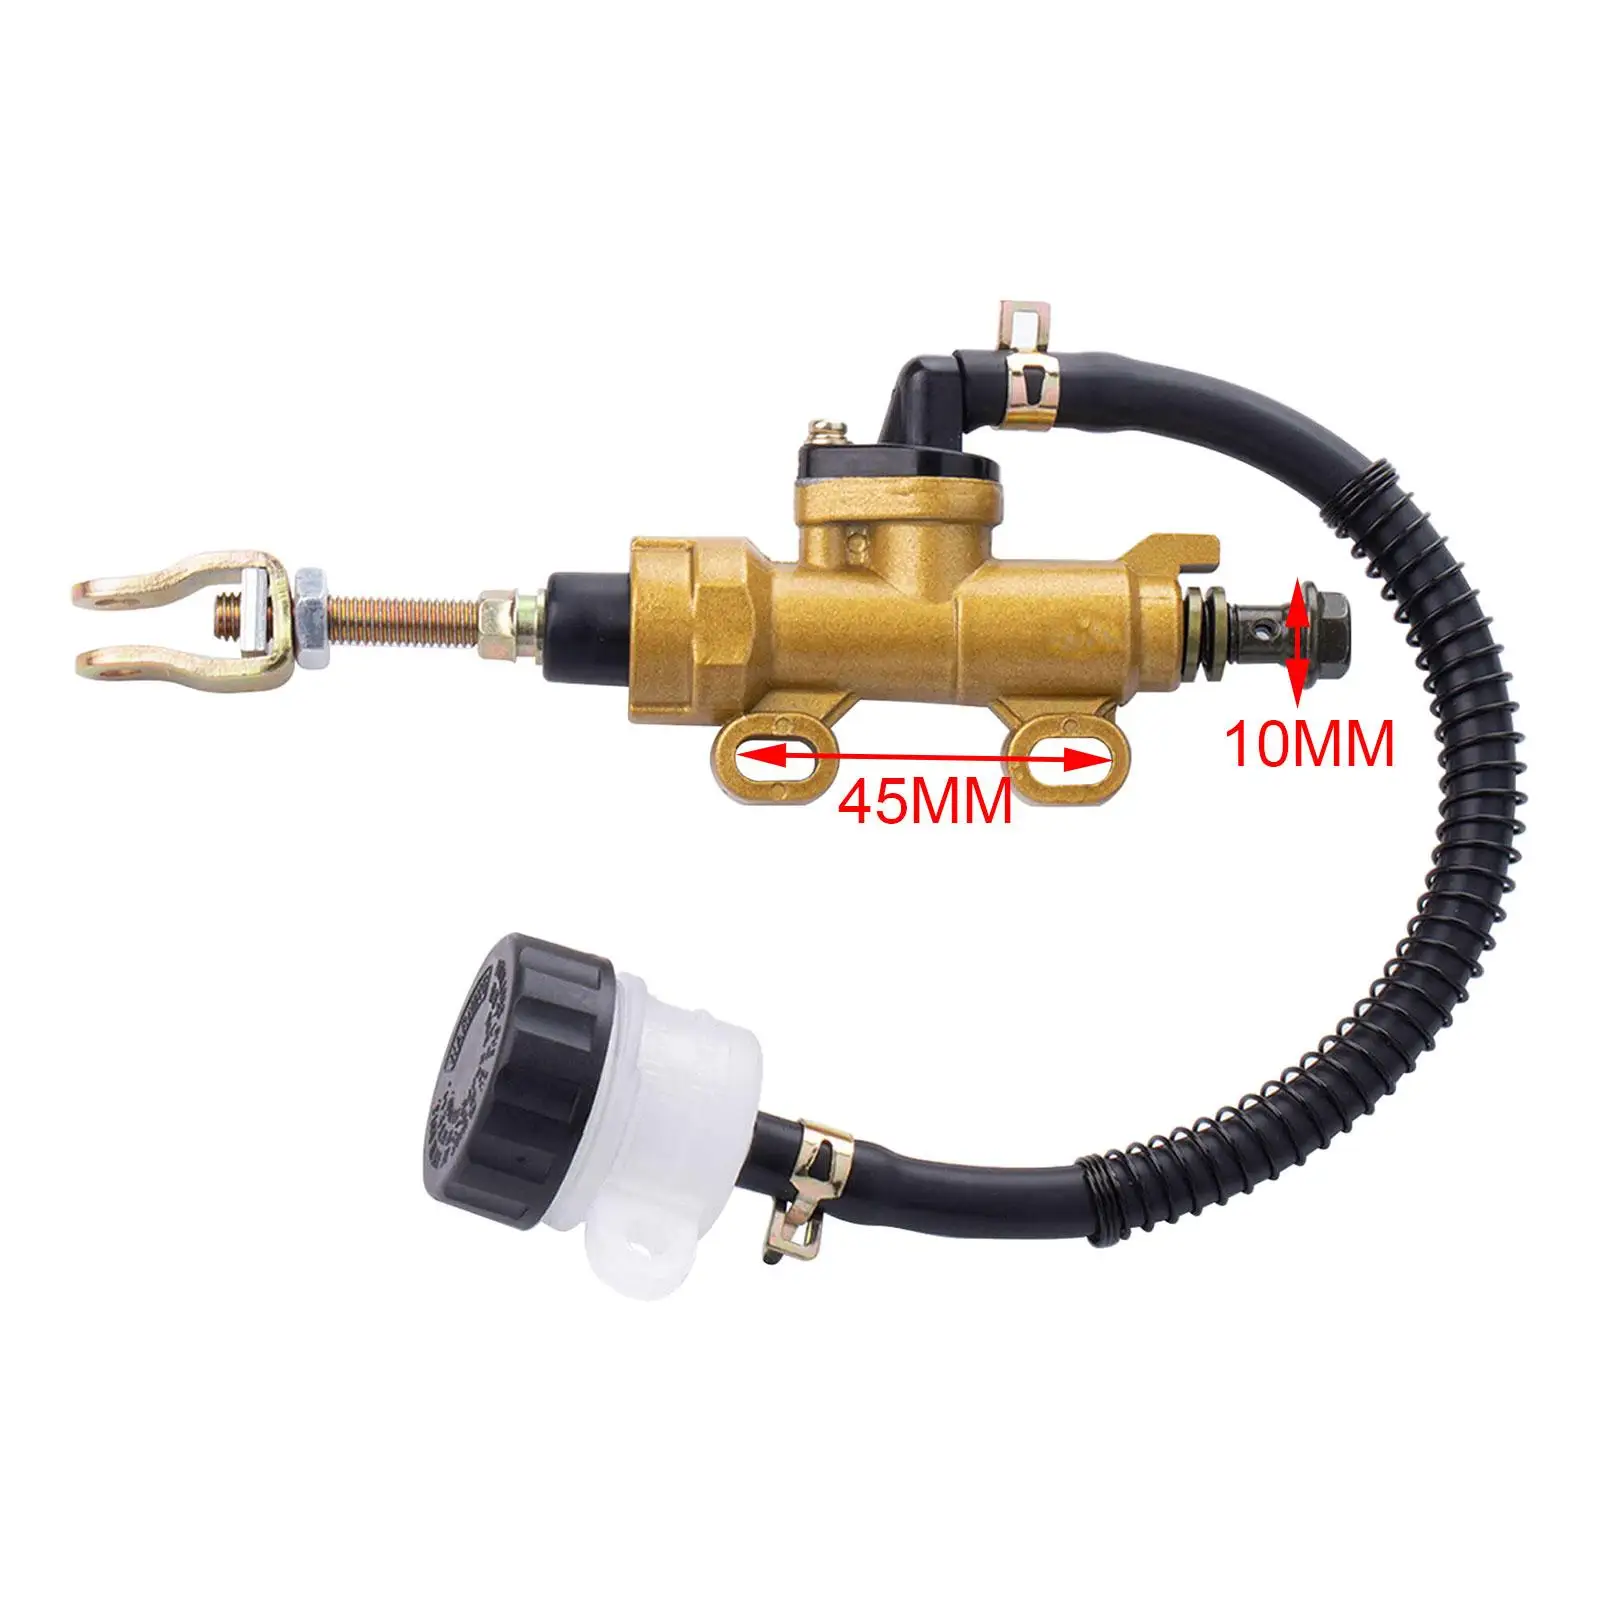 Motorcycle Rear Foot Brake Main Pump Hydraulic Cylinder with Reservoir for Honda CB400 600 900 ATV Durable Easy to Install